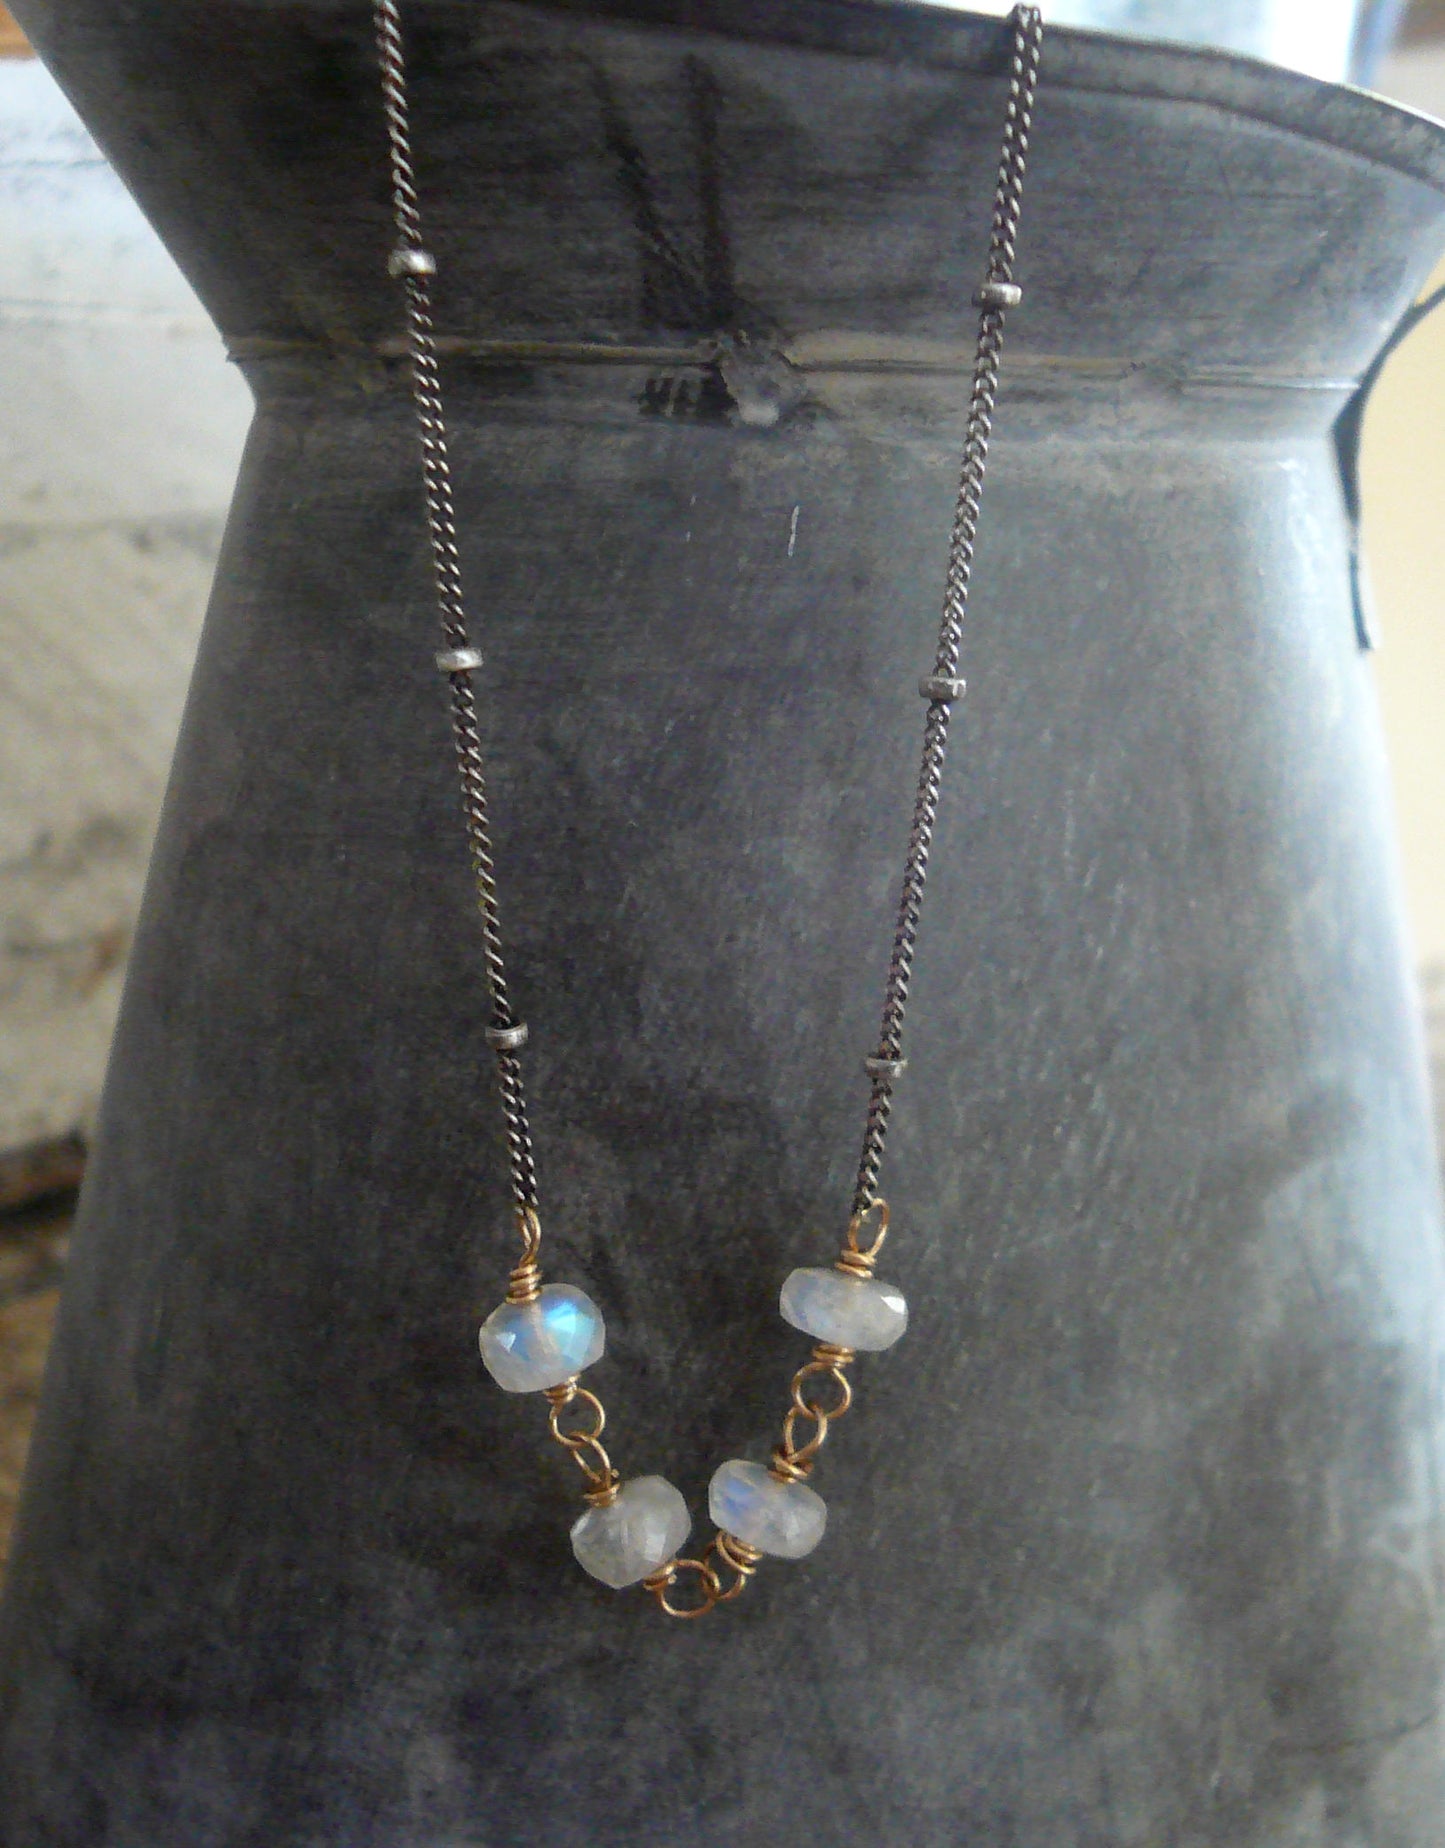 Miscible Collection Necklace - Handmade. Moonstone. Oxidized Sterling silver. 14kt Goldfill. Mixed Metal Necklace